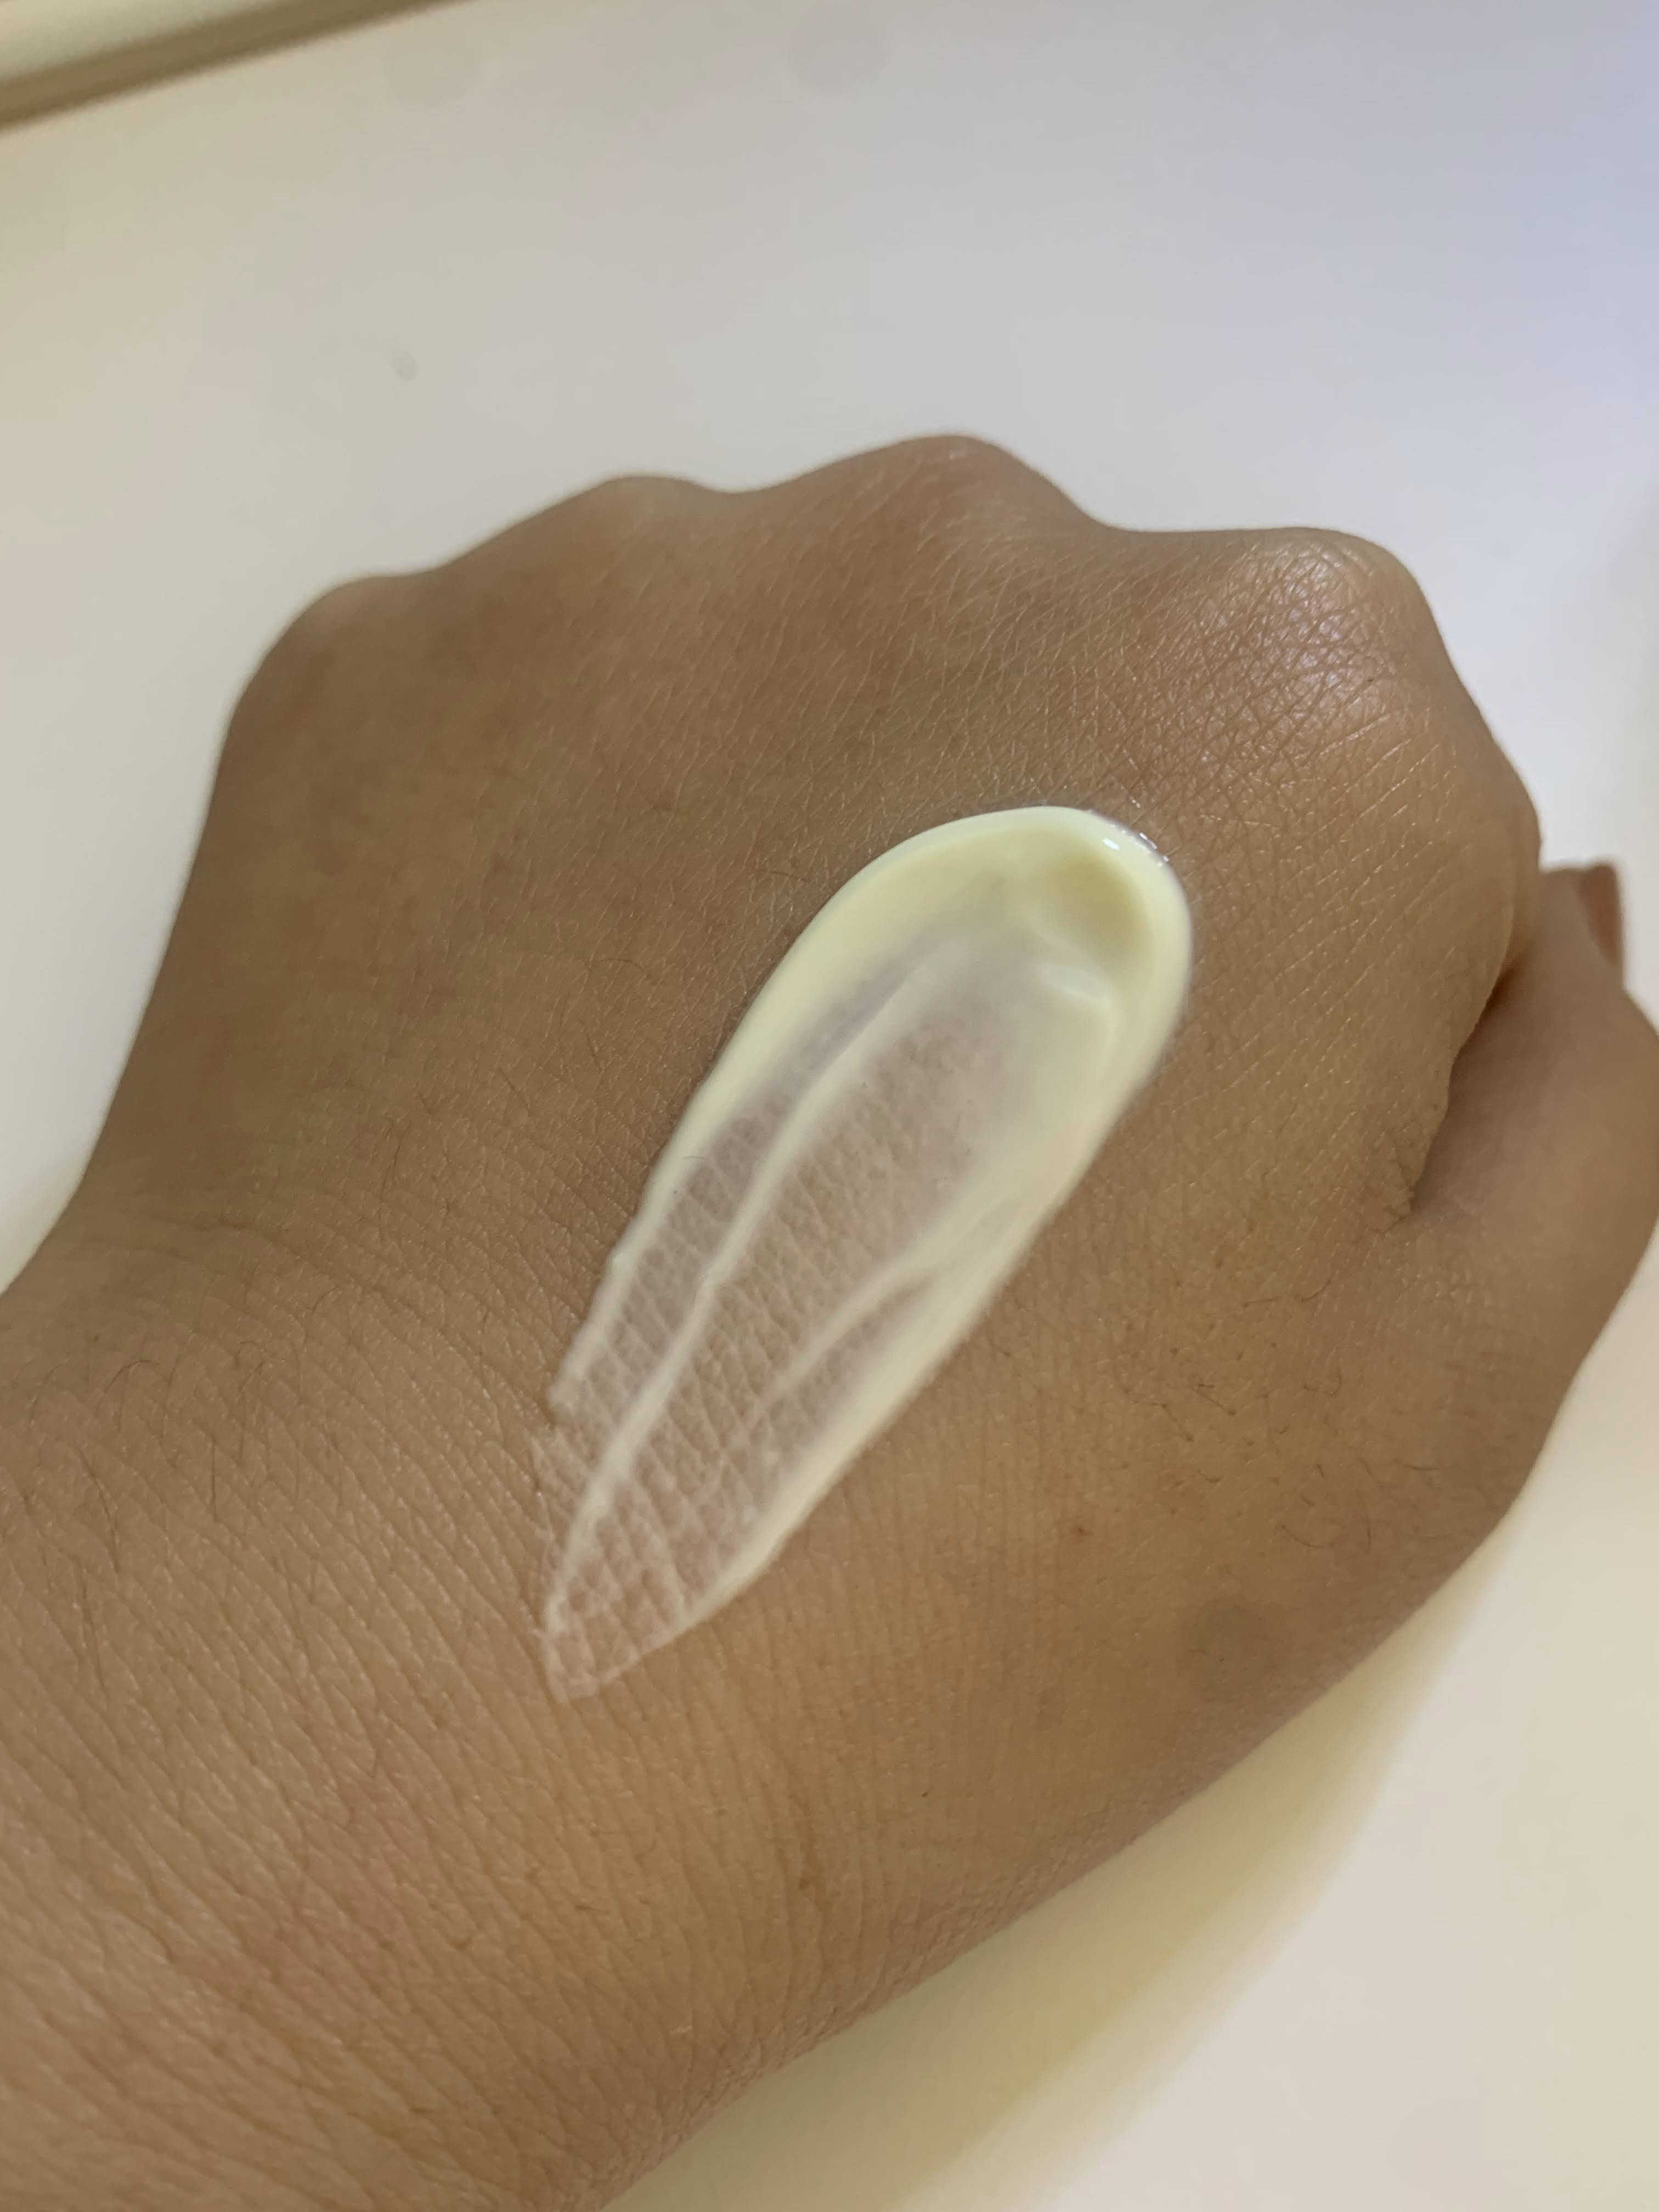 Swatch of the new Purito Sunscreen 